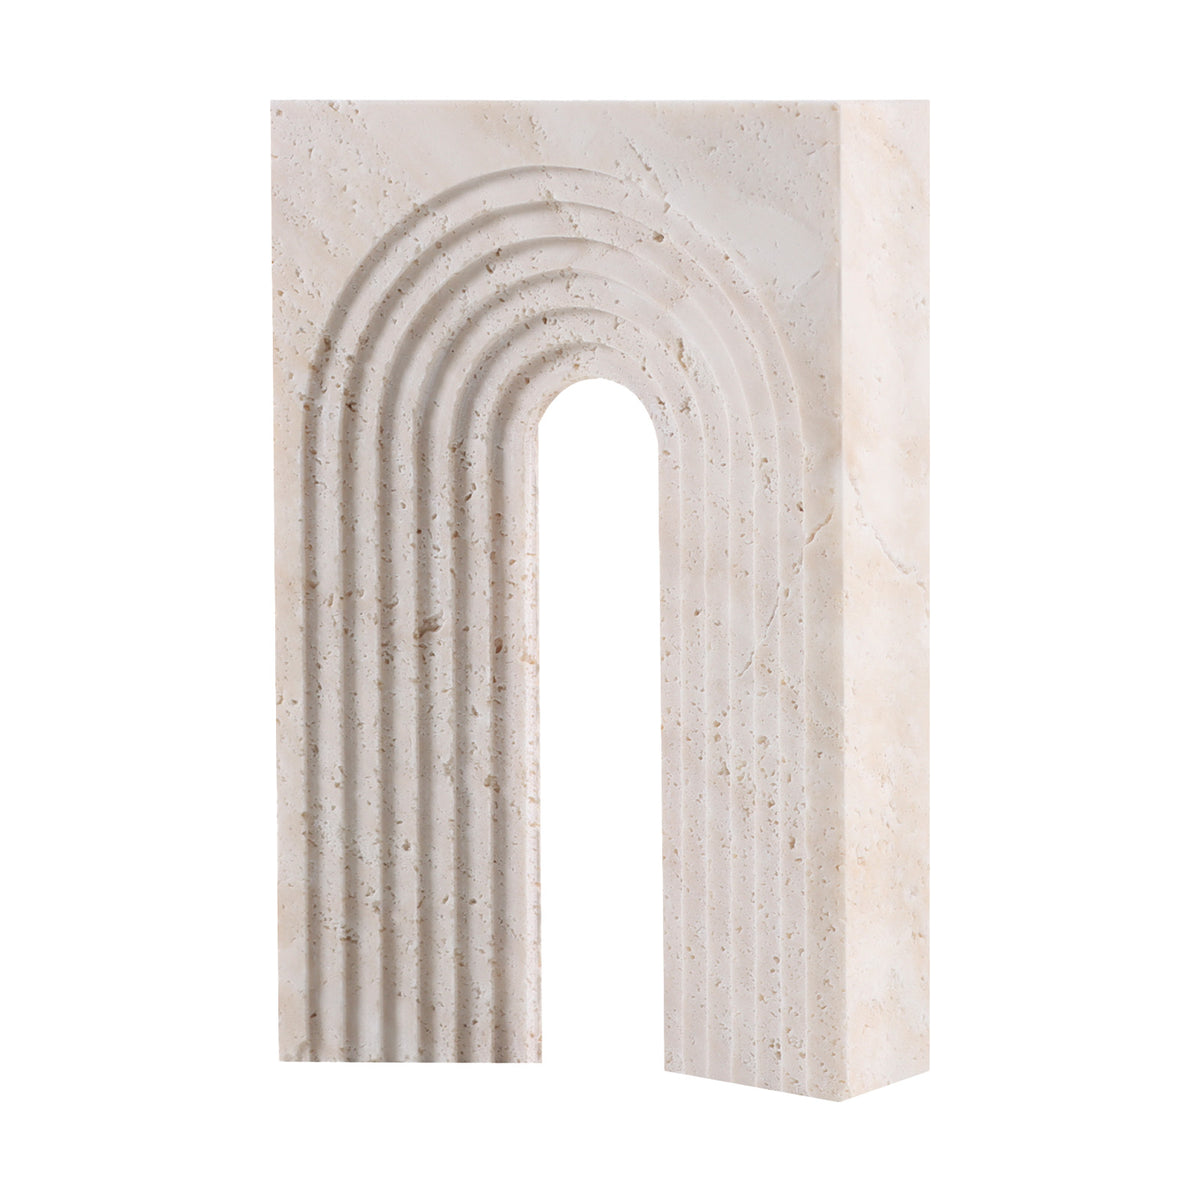 Arch Marble II Sculpture